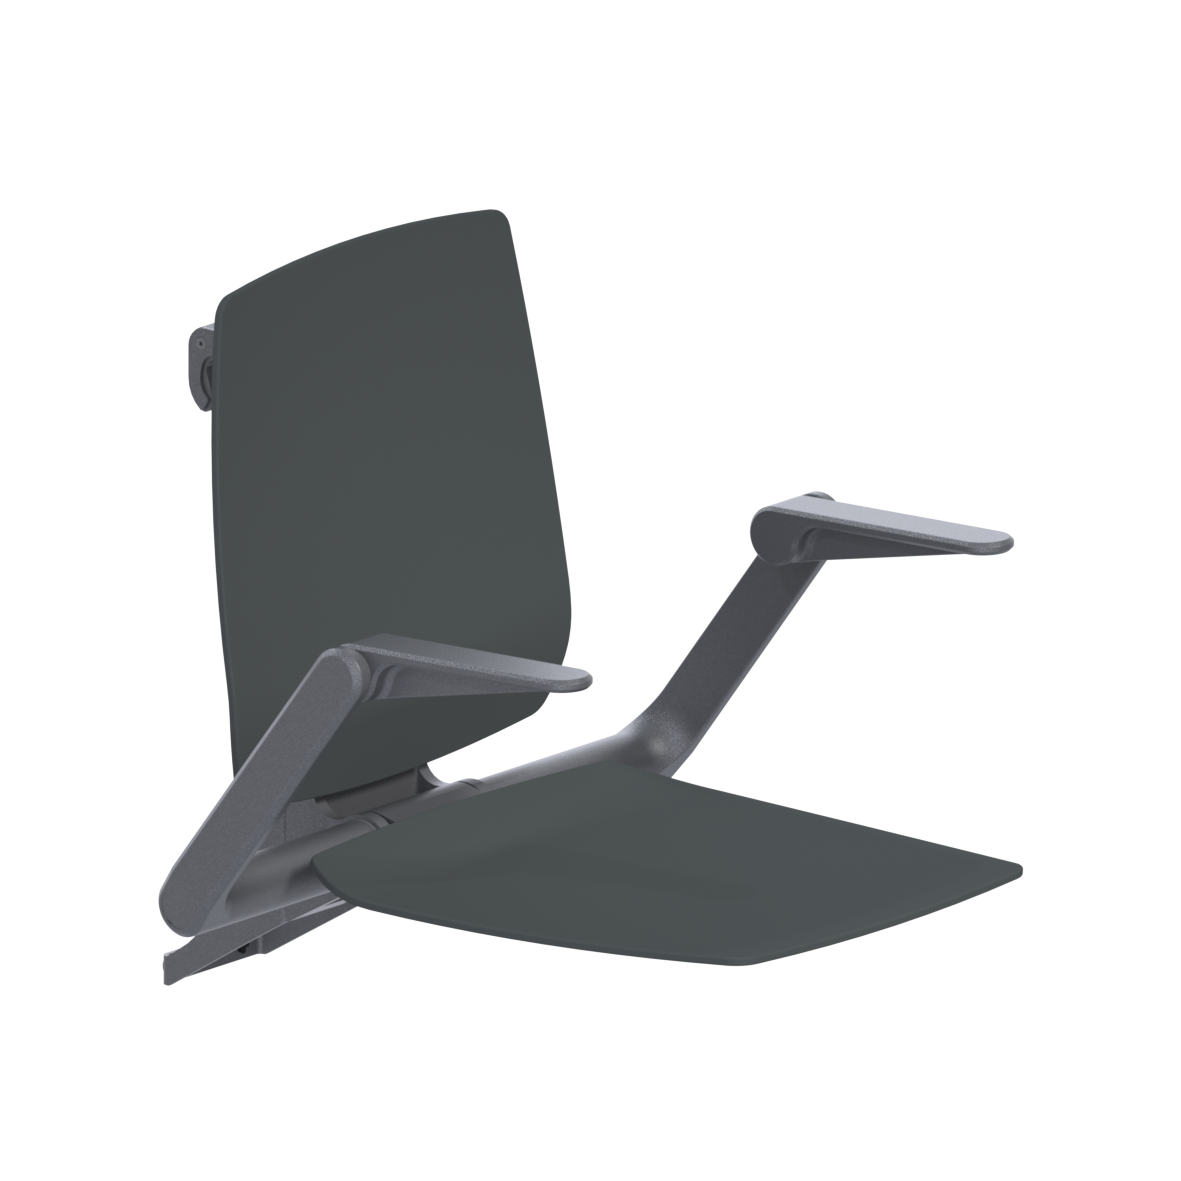 Ascento Hanging seat FR, with backrest and armrests, for Cavere Care, 584 x 640 x 574 mm, Ascento Dark grey